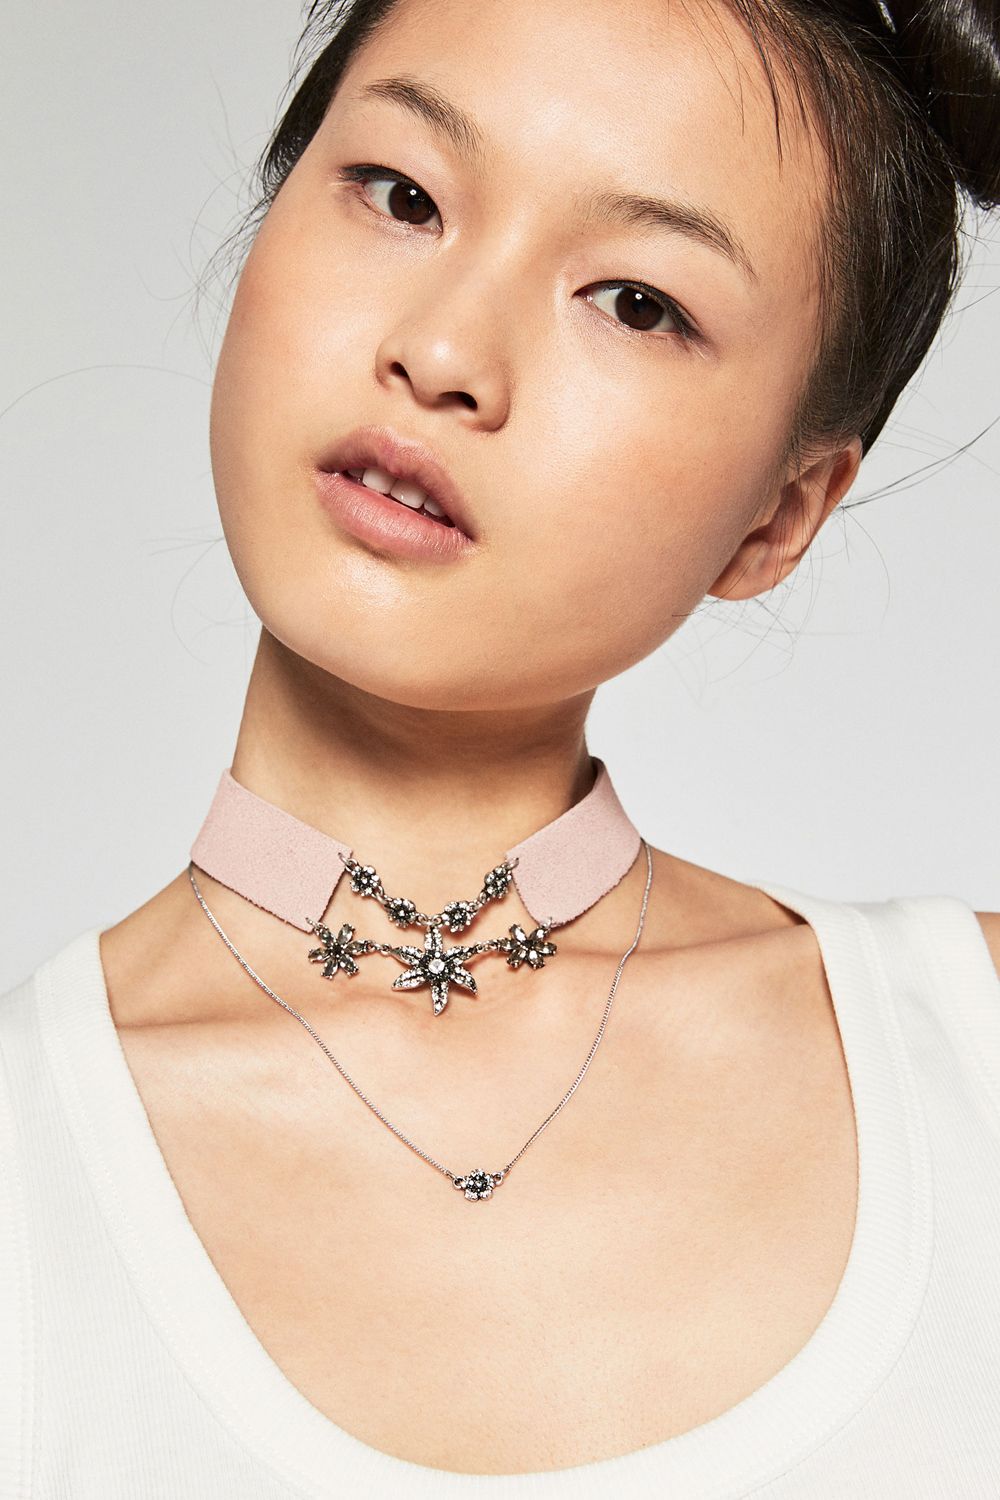 Want: Open Collar Necklaces – Broke and Beautiful